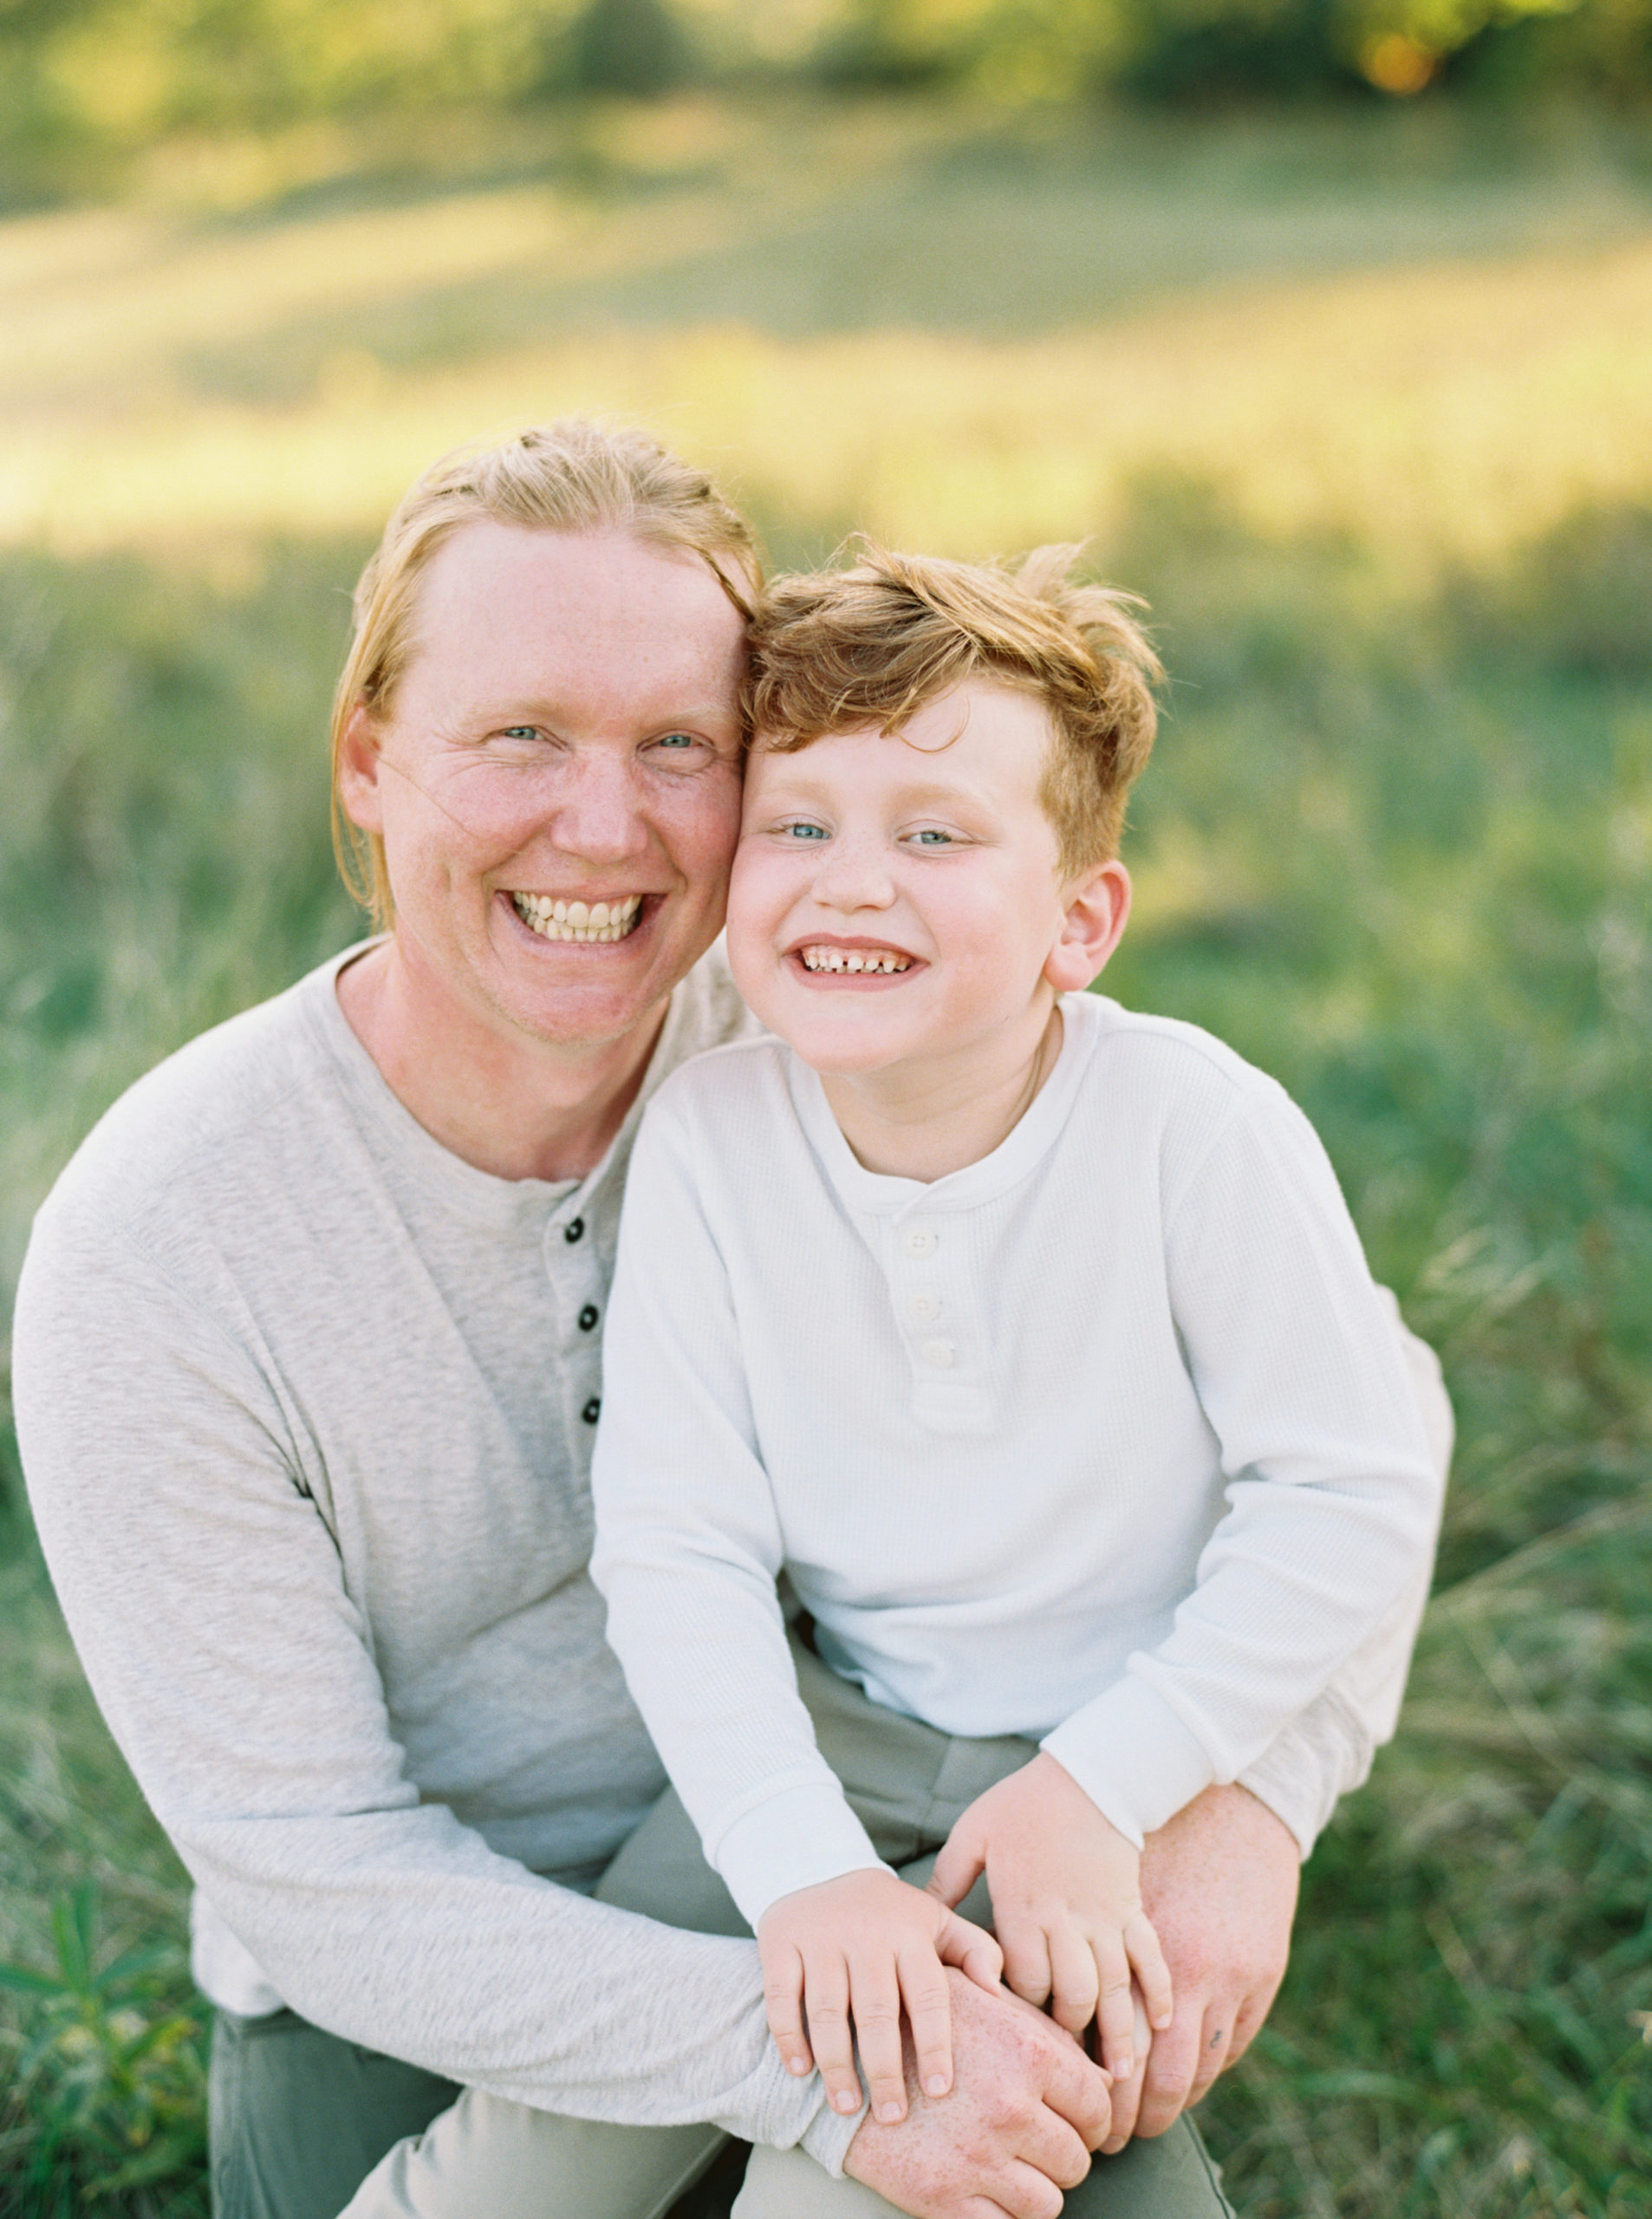 Father and Son cuddling in a grassy green field setting in Shorewood in the summer